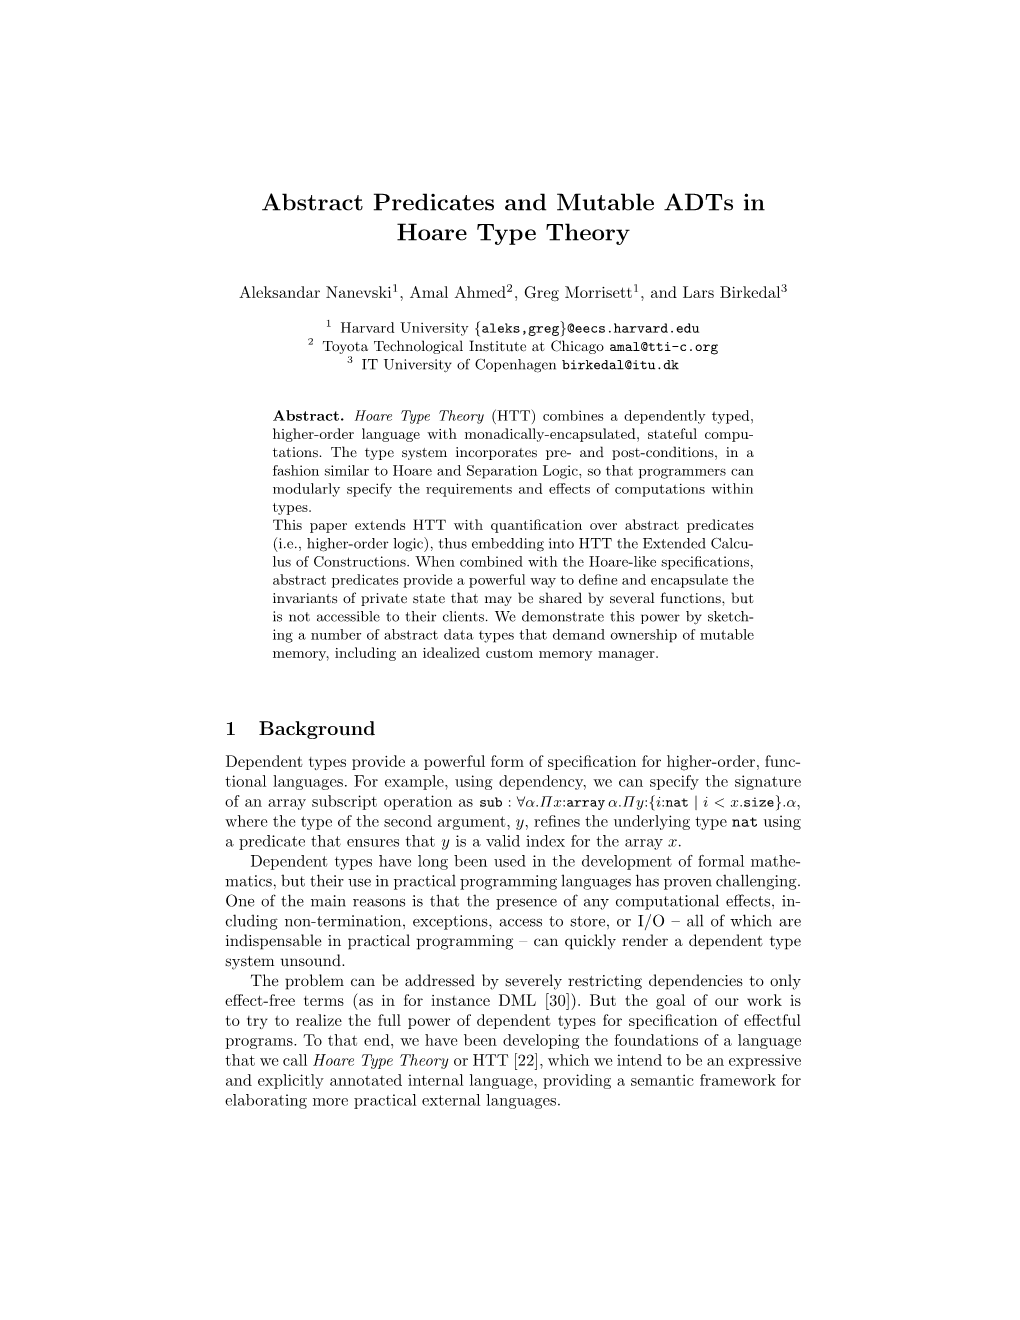 Abstract Predicates and Mutable Adts in Hoare Type Theory